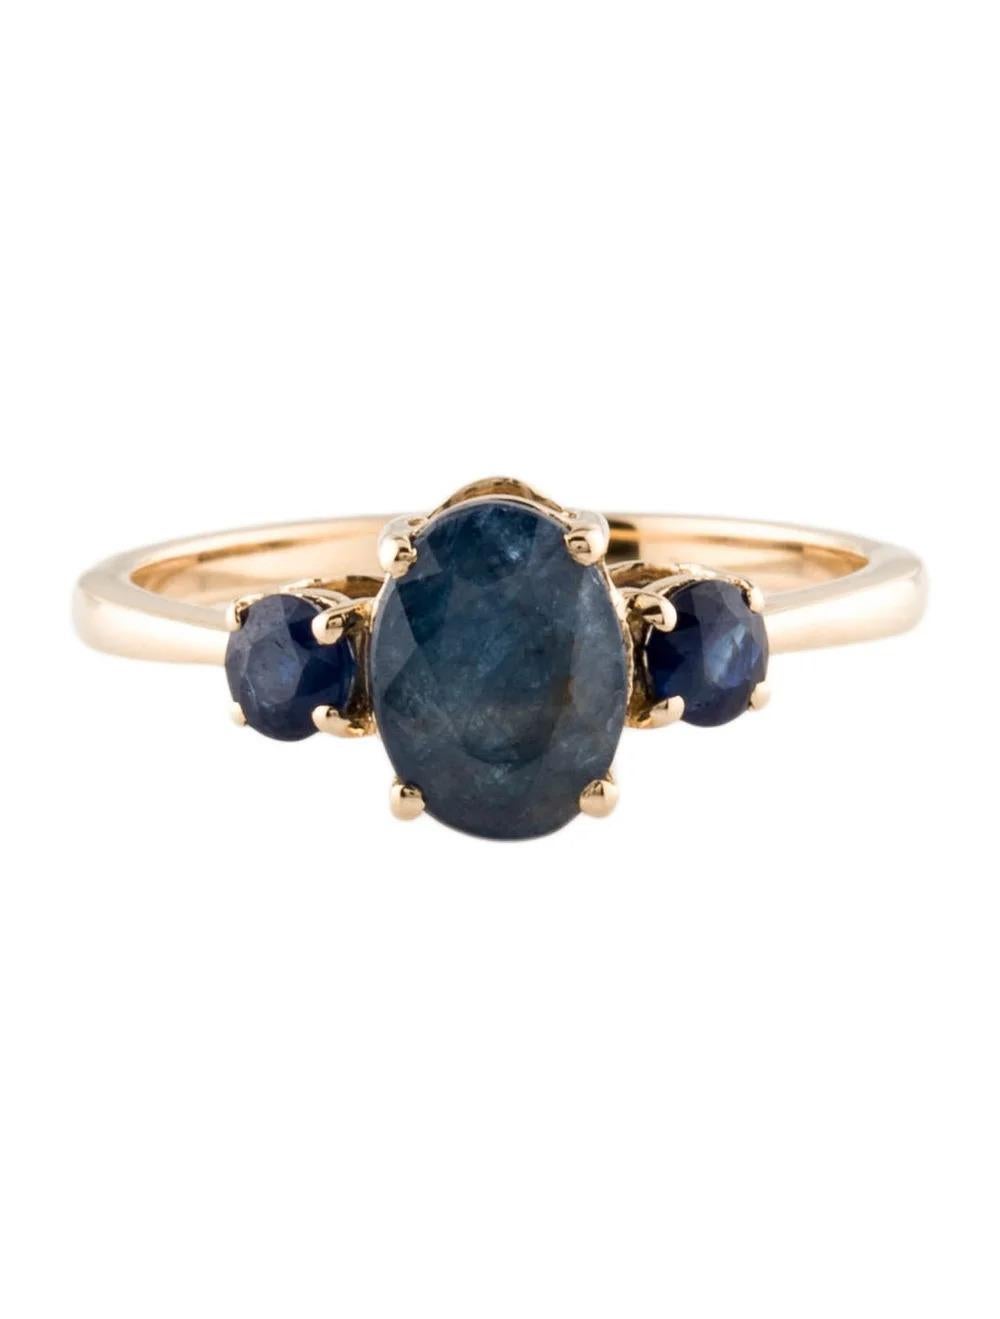 Oval Cut 14K 1.27ct Sapphire Cocktail Ring Size 6.75: Yellow Gold Statement Jewelry For Sale